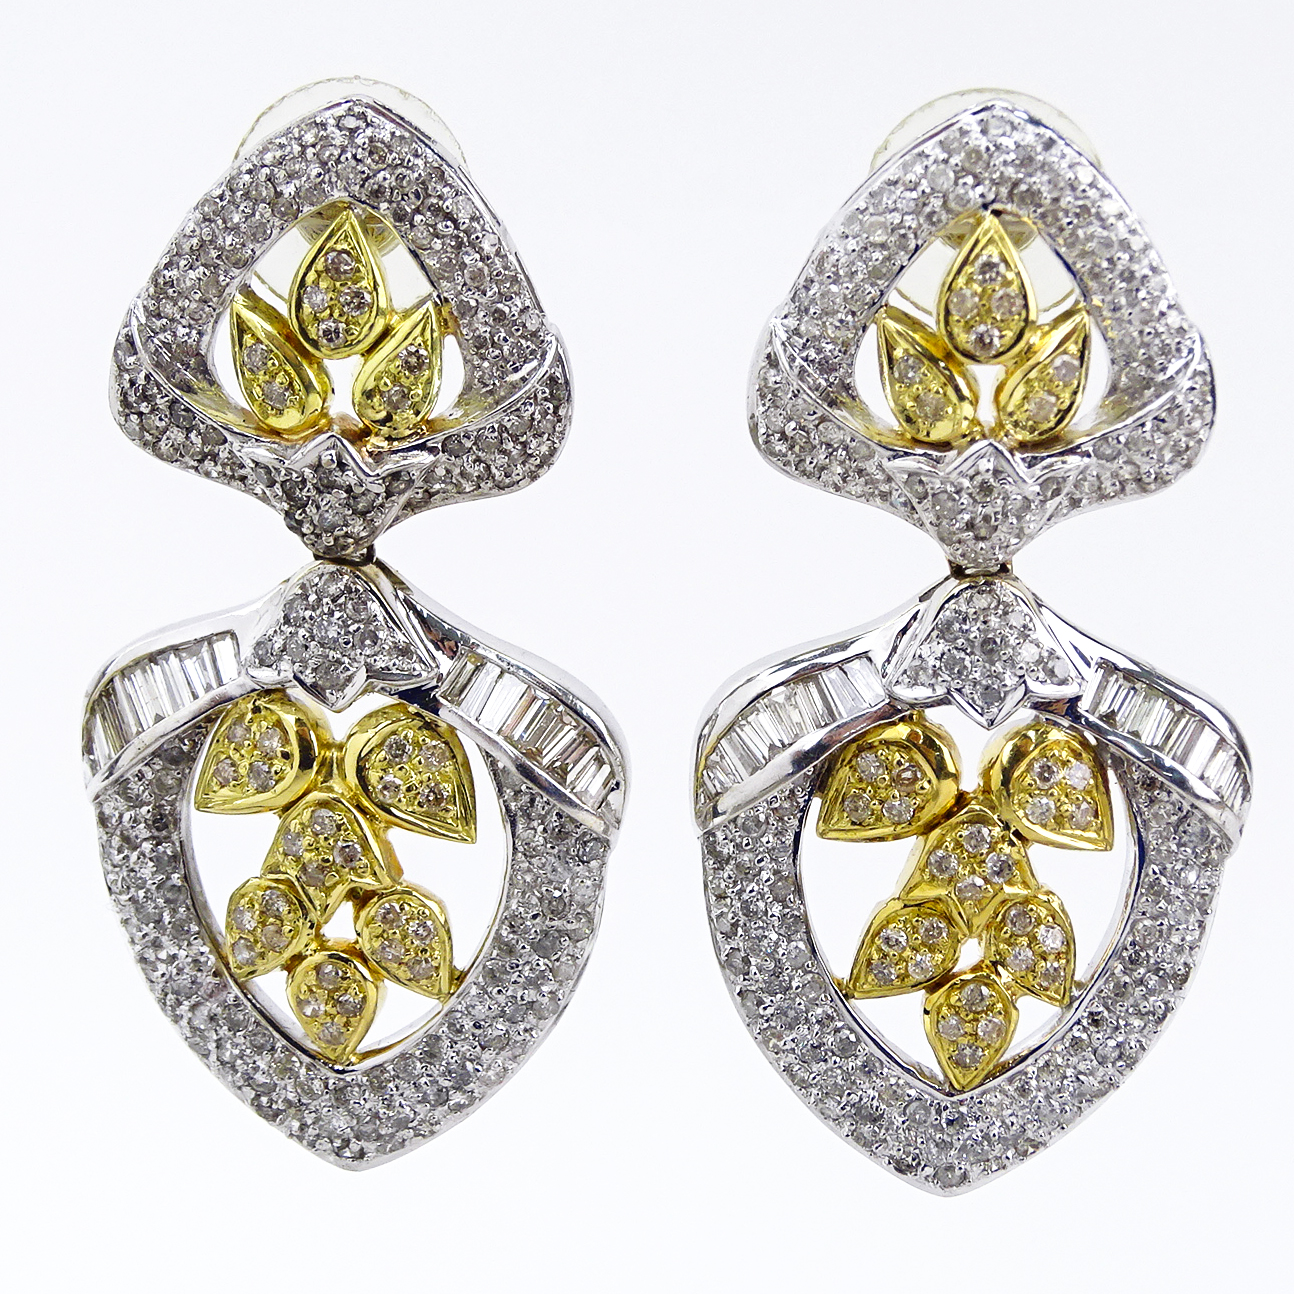 Pave Set Round Cut and Baguette Diamond and 18 Karat White and Yellow Gold Pendant Earrings